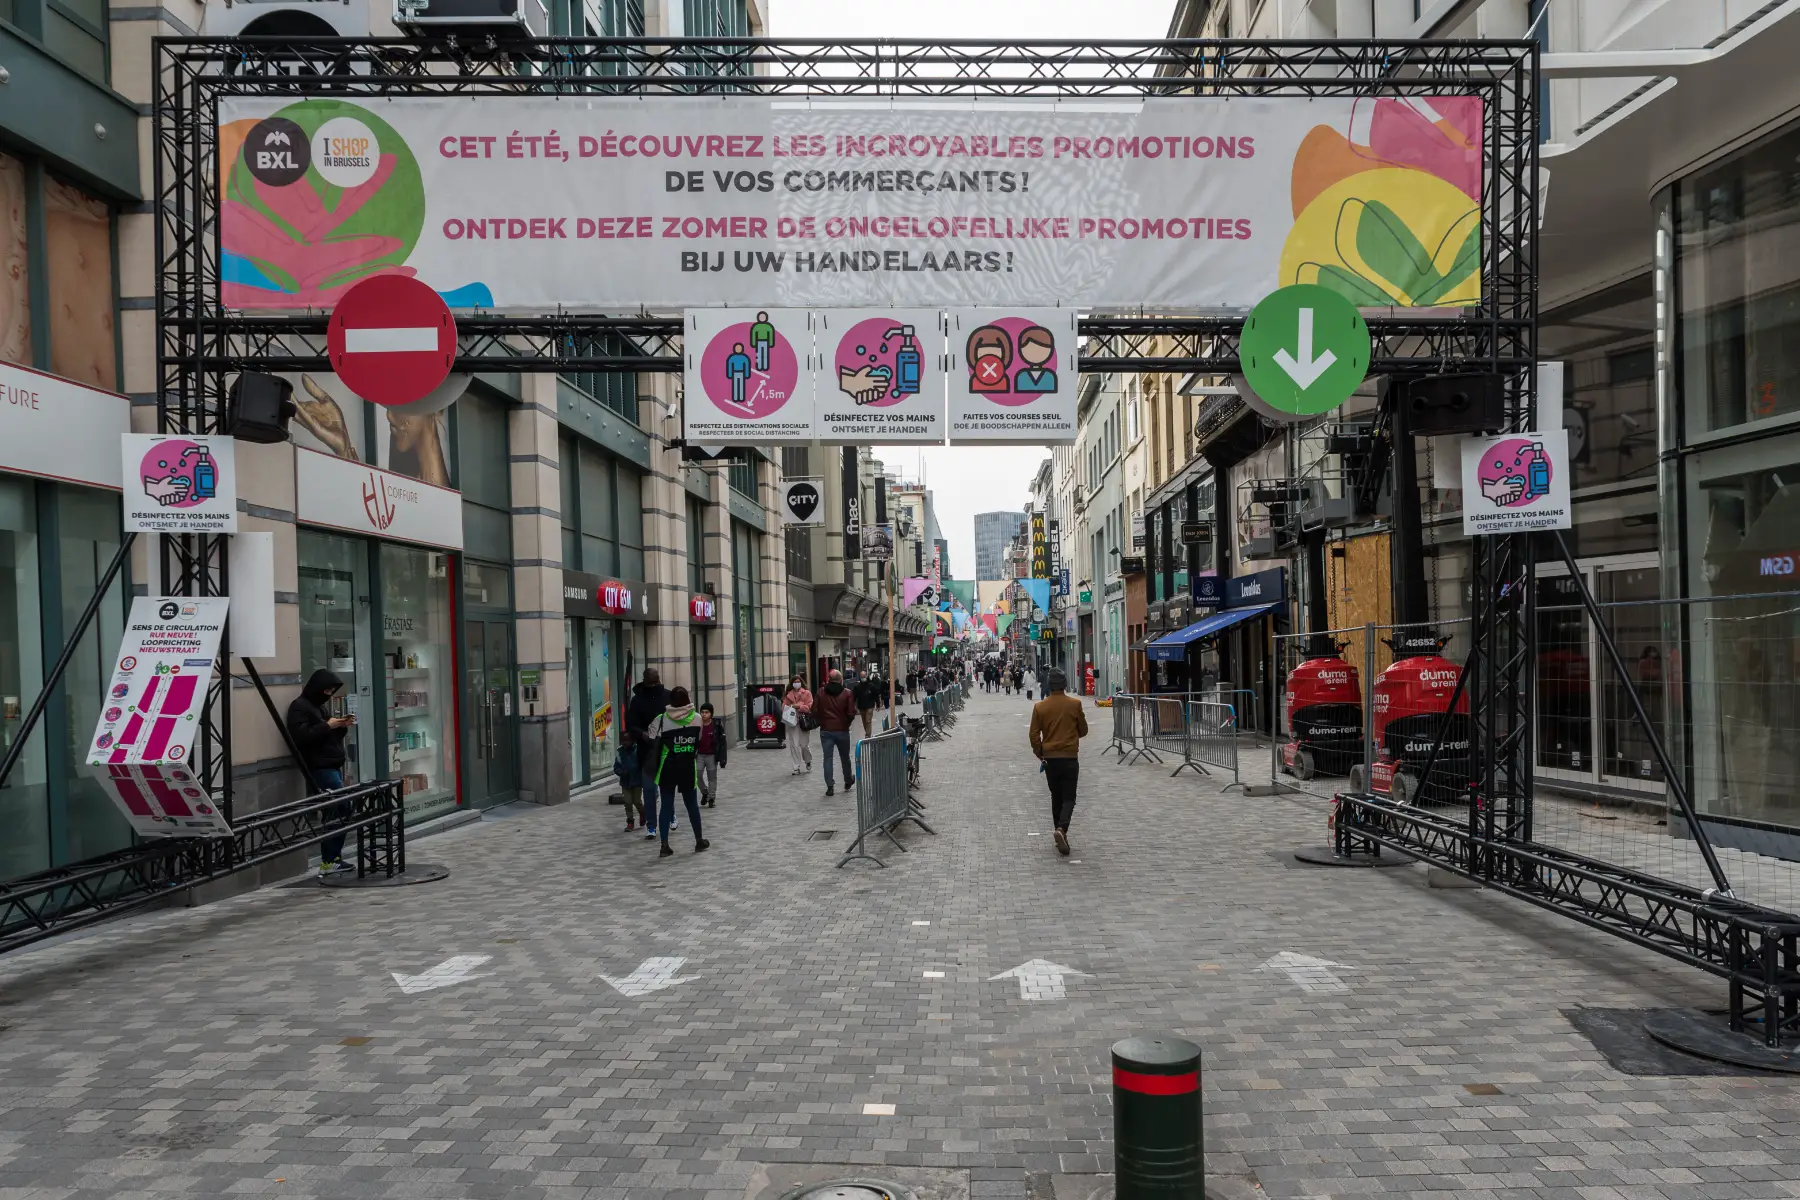 A shopping street in Brussels with a large archway and a sign telling people to walk on the right-hand side.